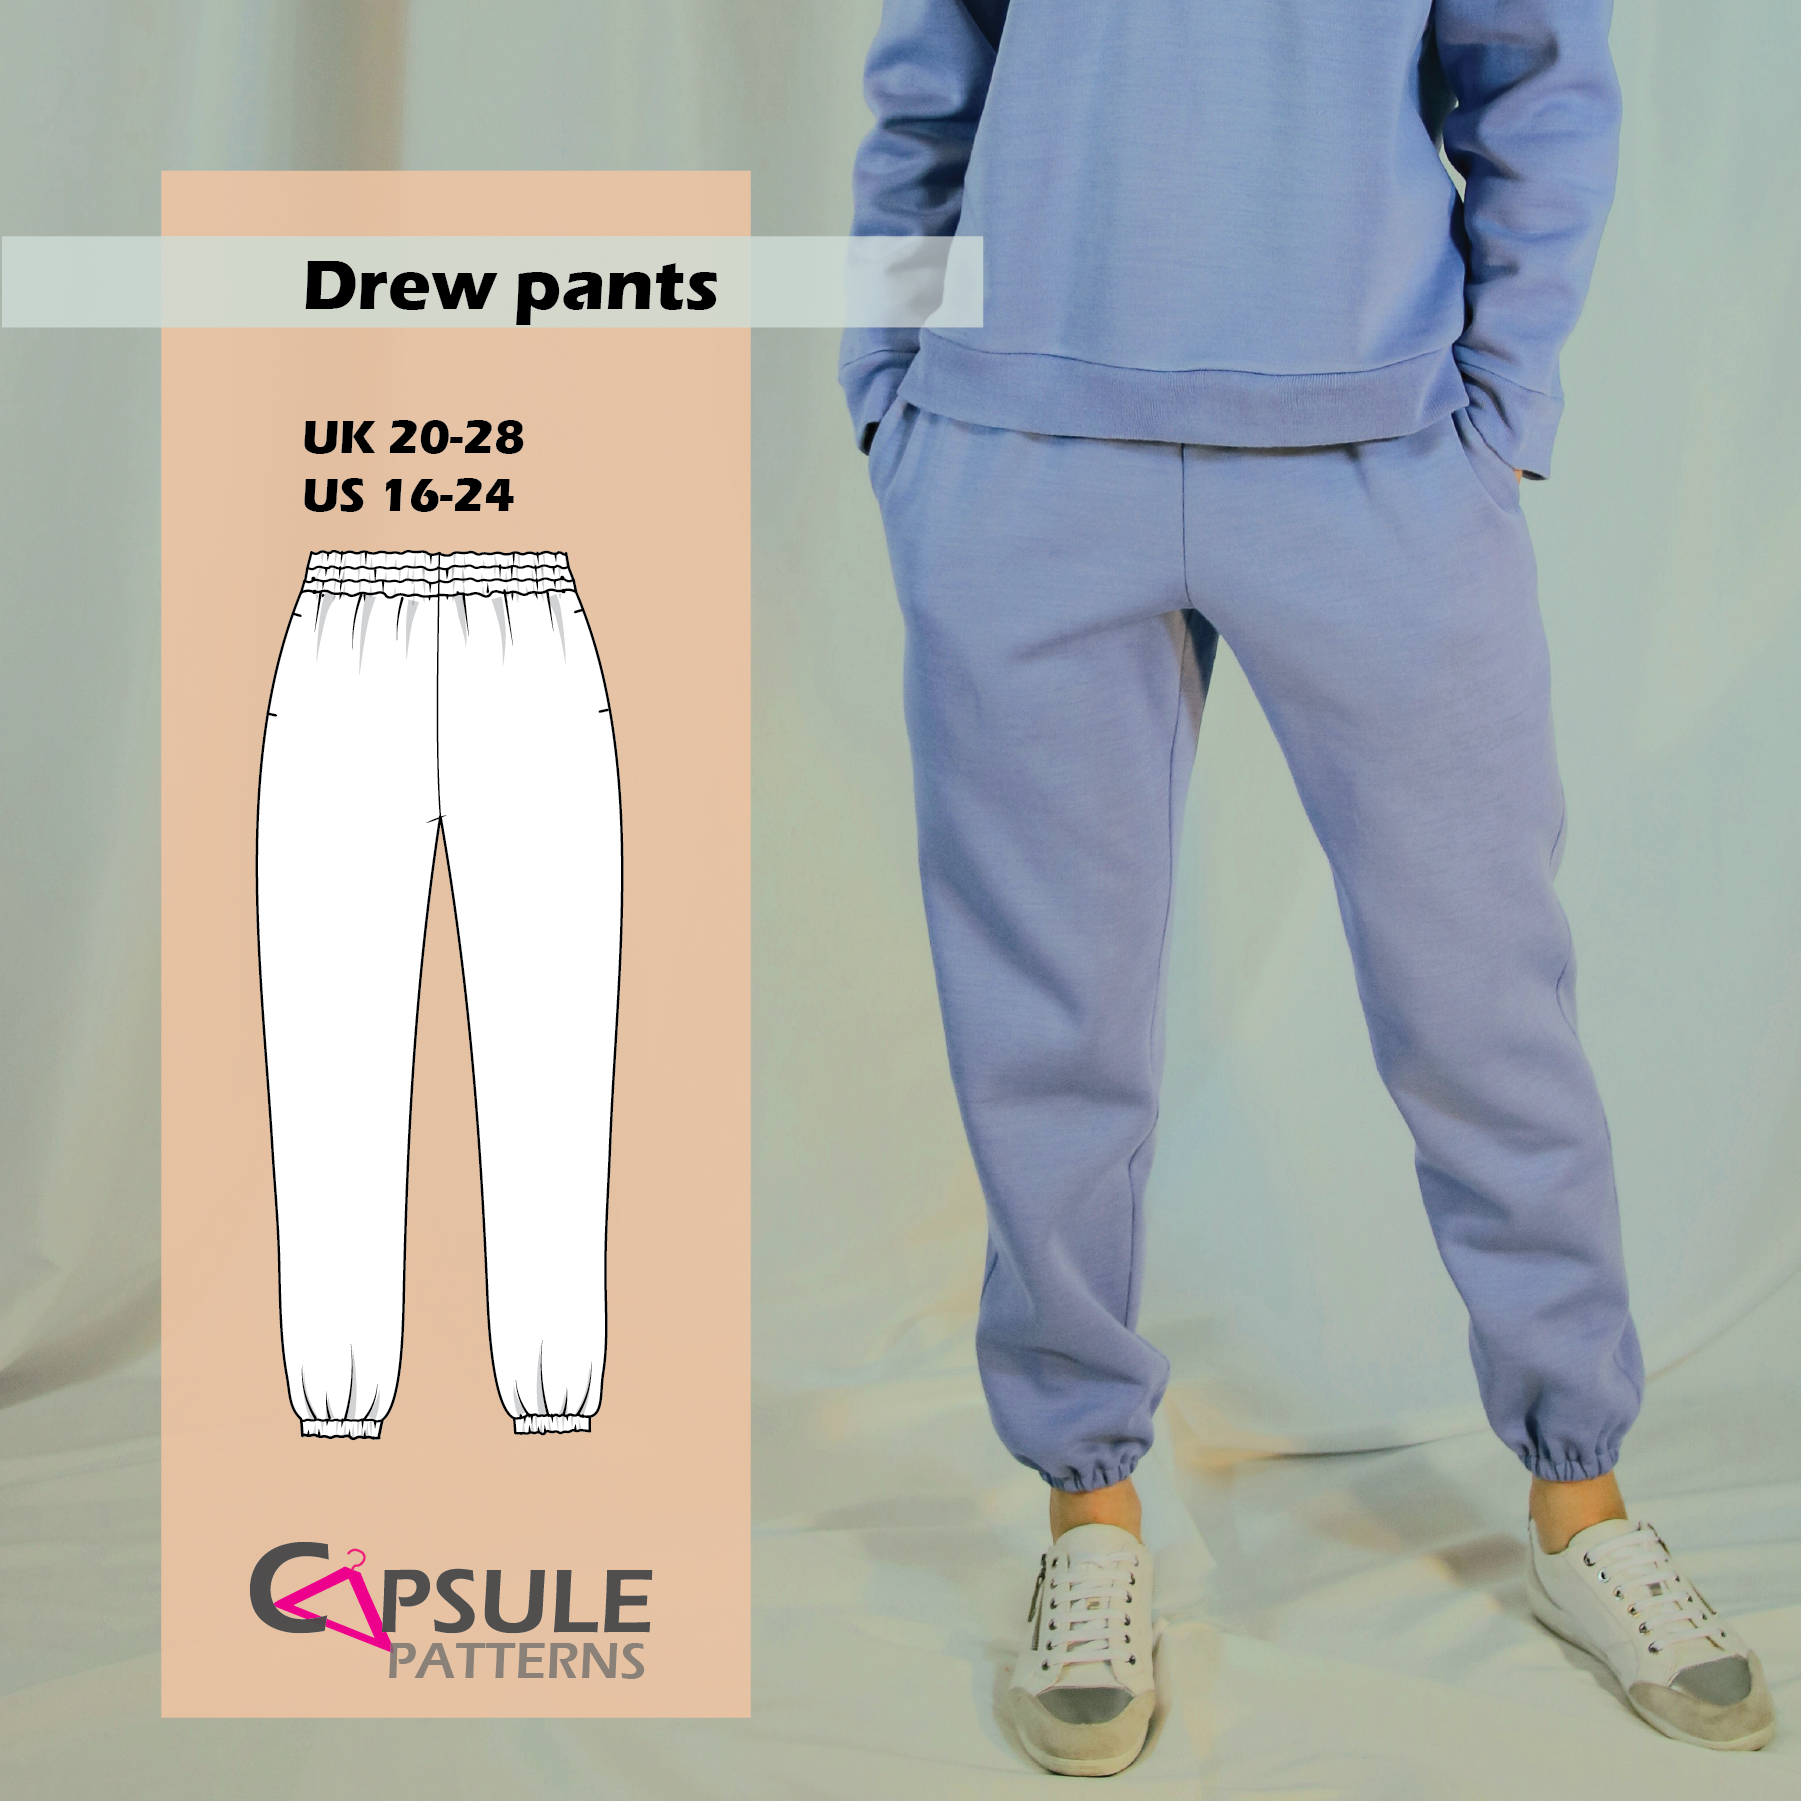 iThinksew - Patterns and More - IvL - Slim sweat pants sewing pattern,  lounge jogger pants pfd pattern, knit fabric trousers, pin tuck pants with  pockets, track suit, instant download